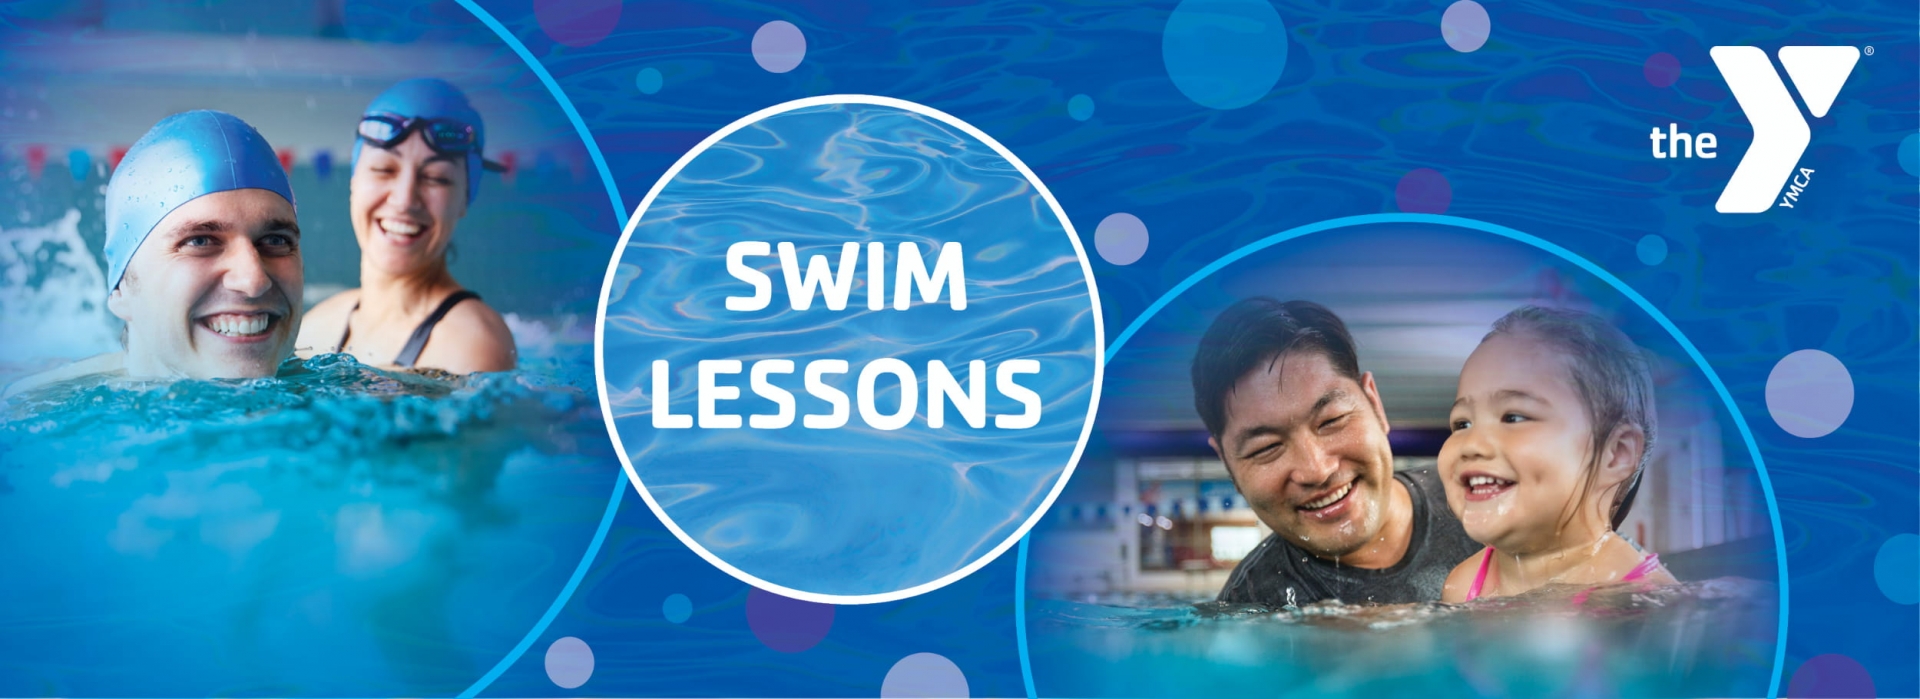 Swim Lessons in Toms River NJ offered at the Ocean County YMCA